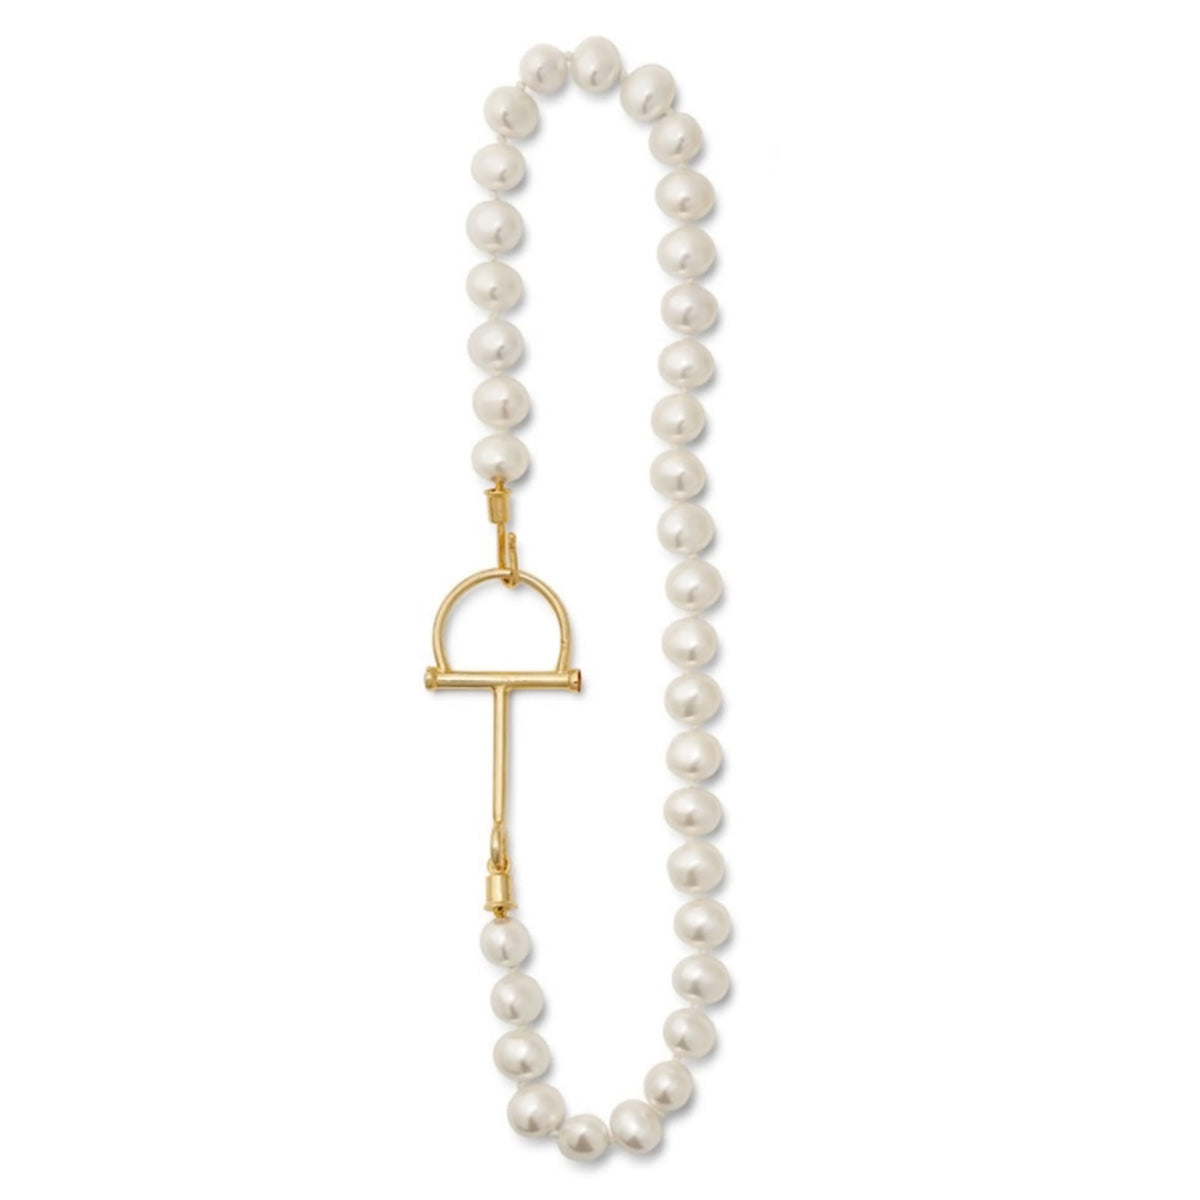 Catherine Canino Classic Equestrian Pearl Necklace